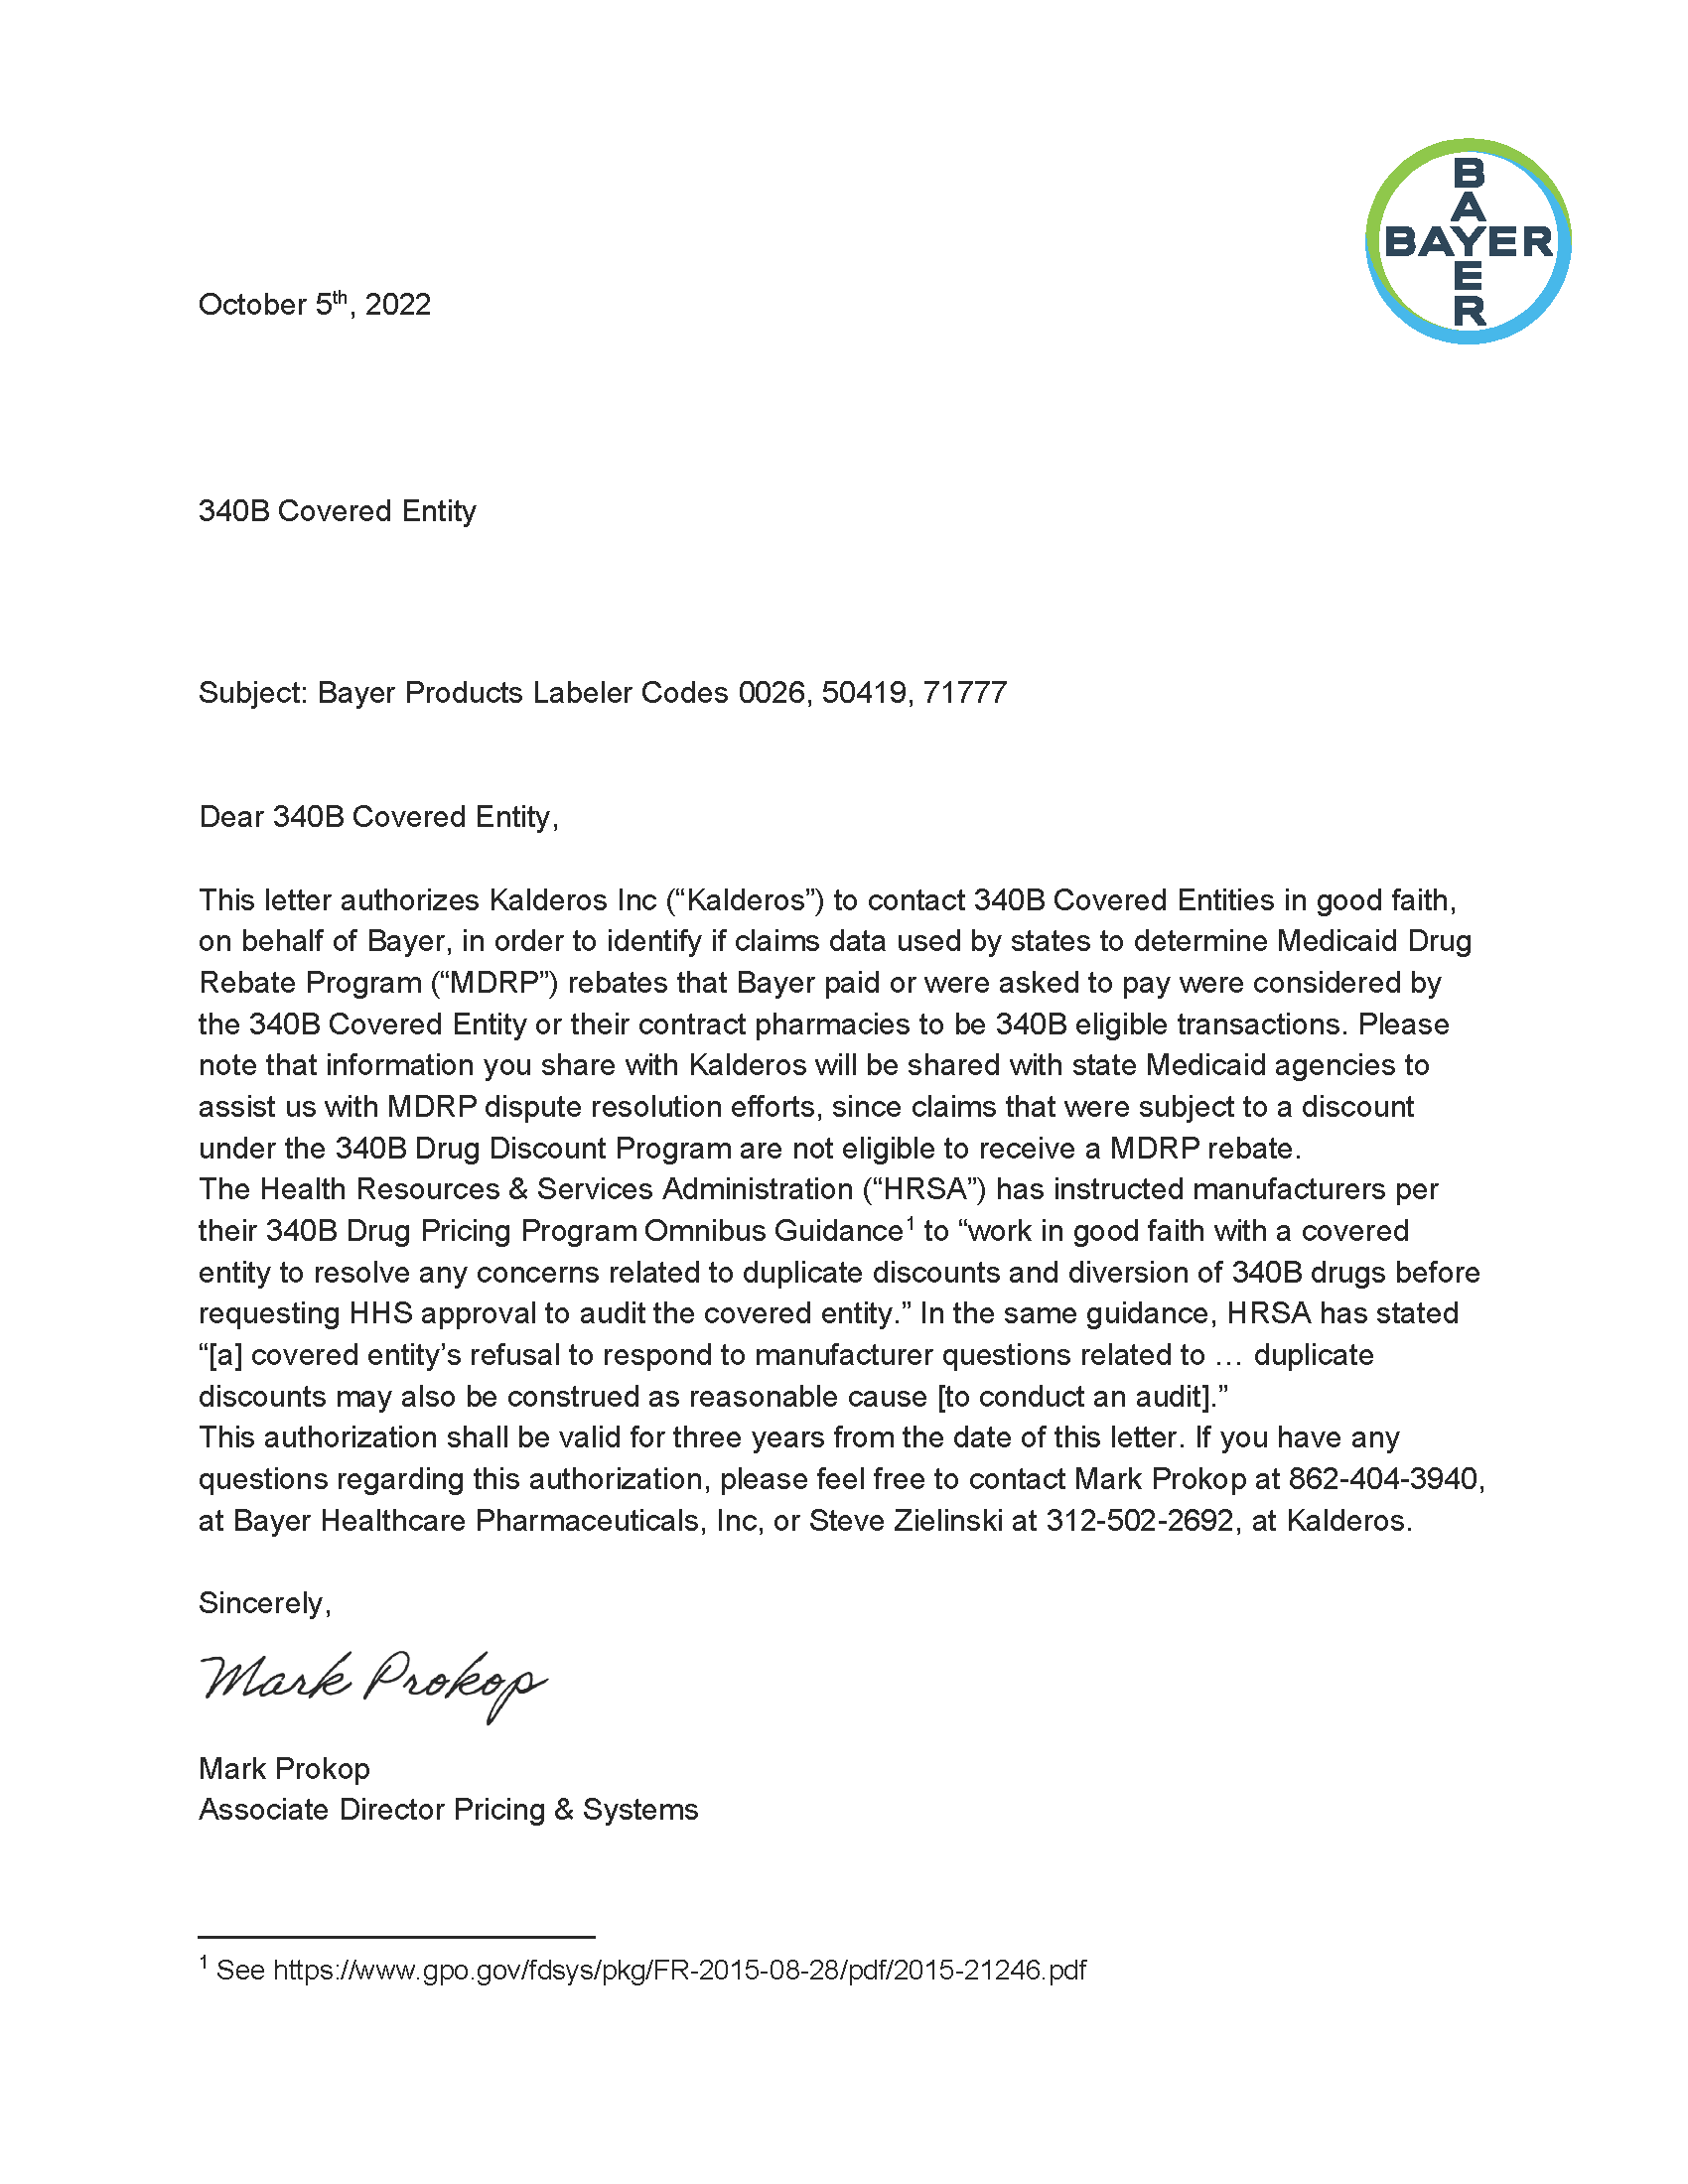 Bayer_authorization_letter_for_CEs.png